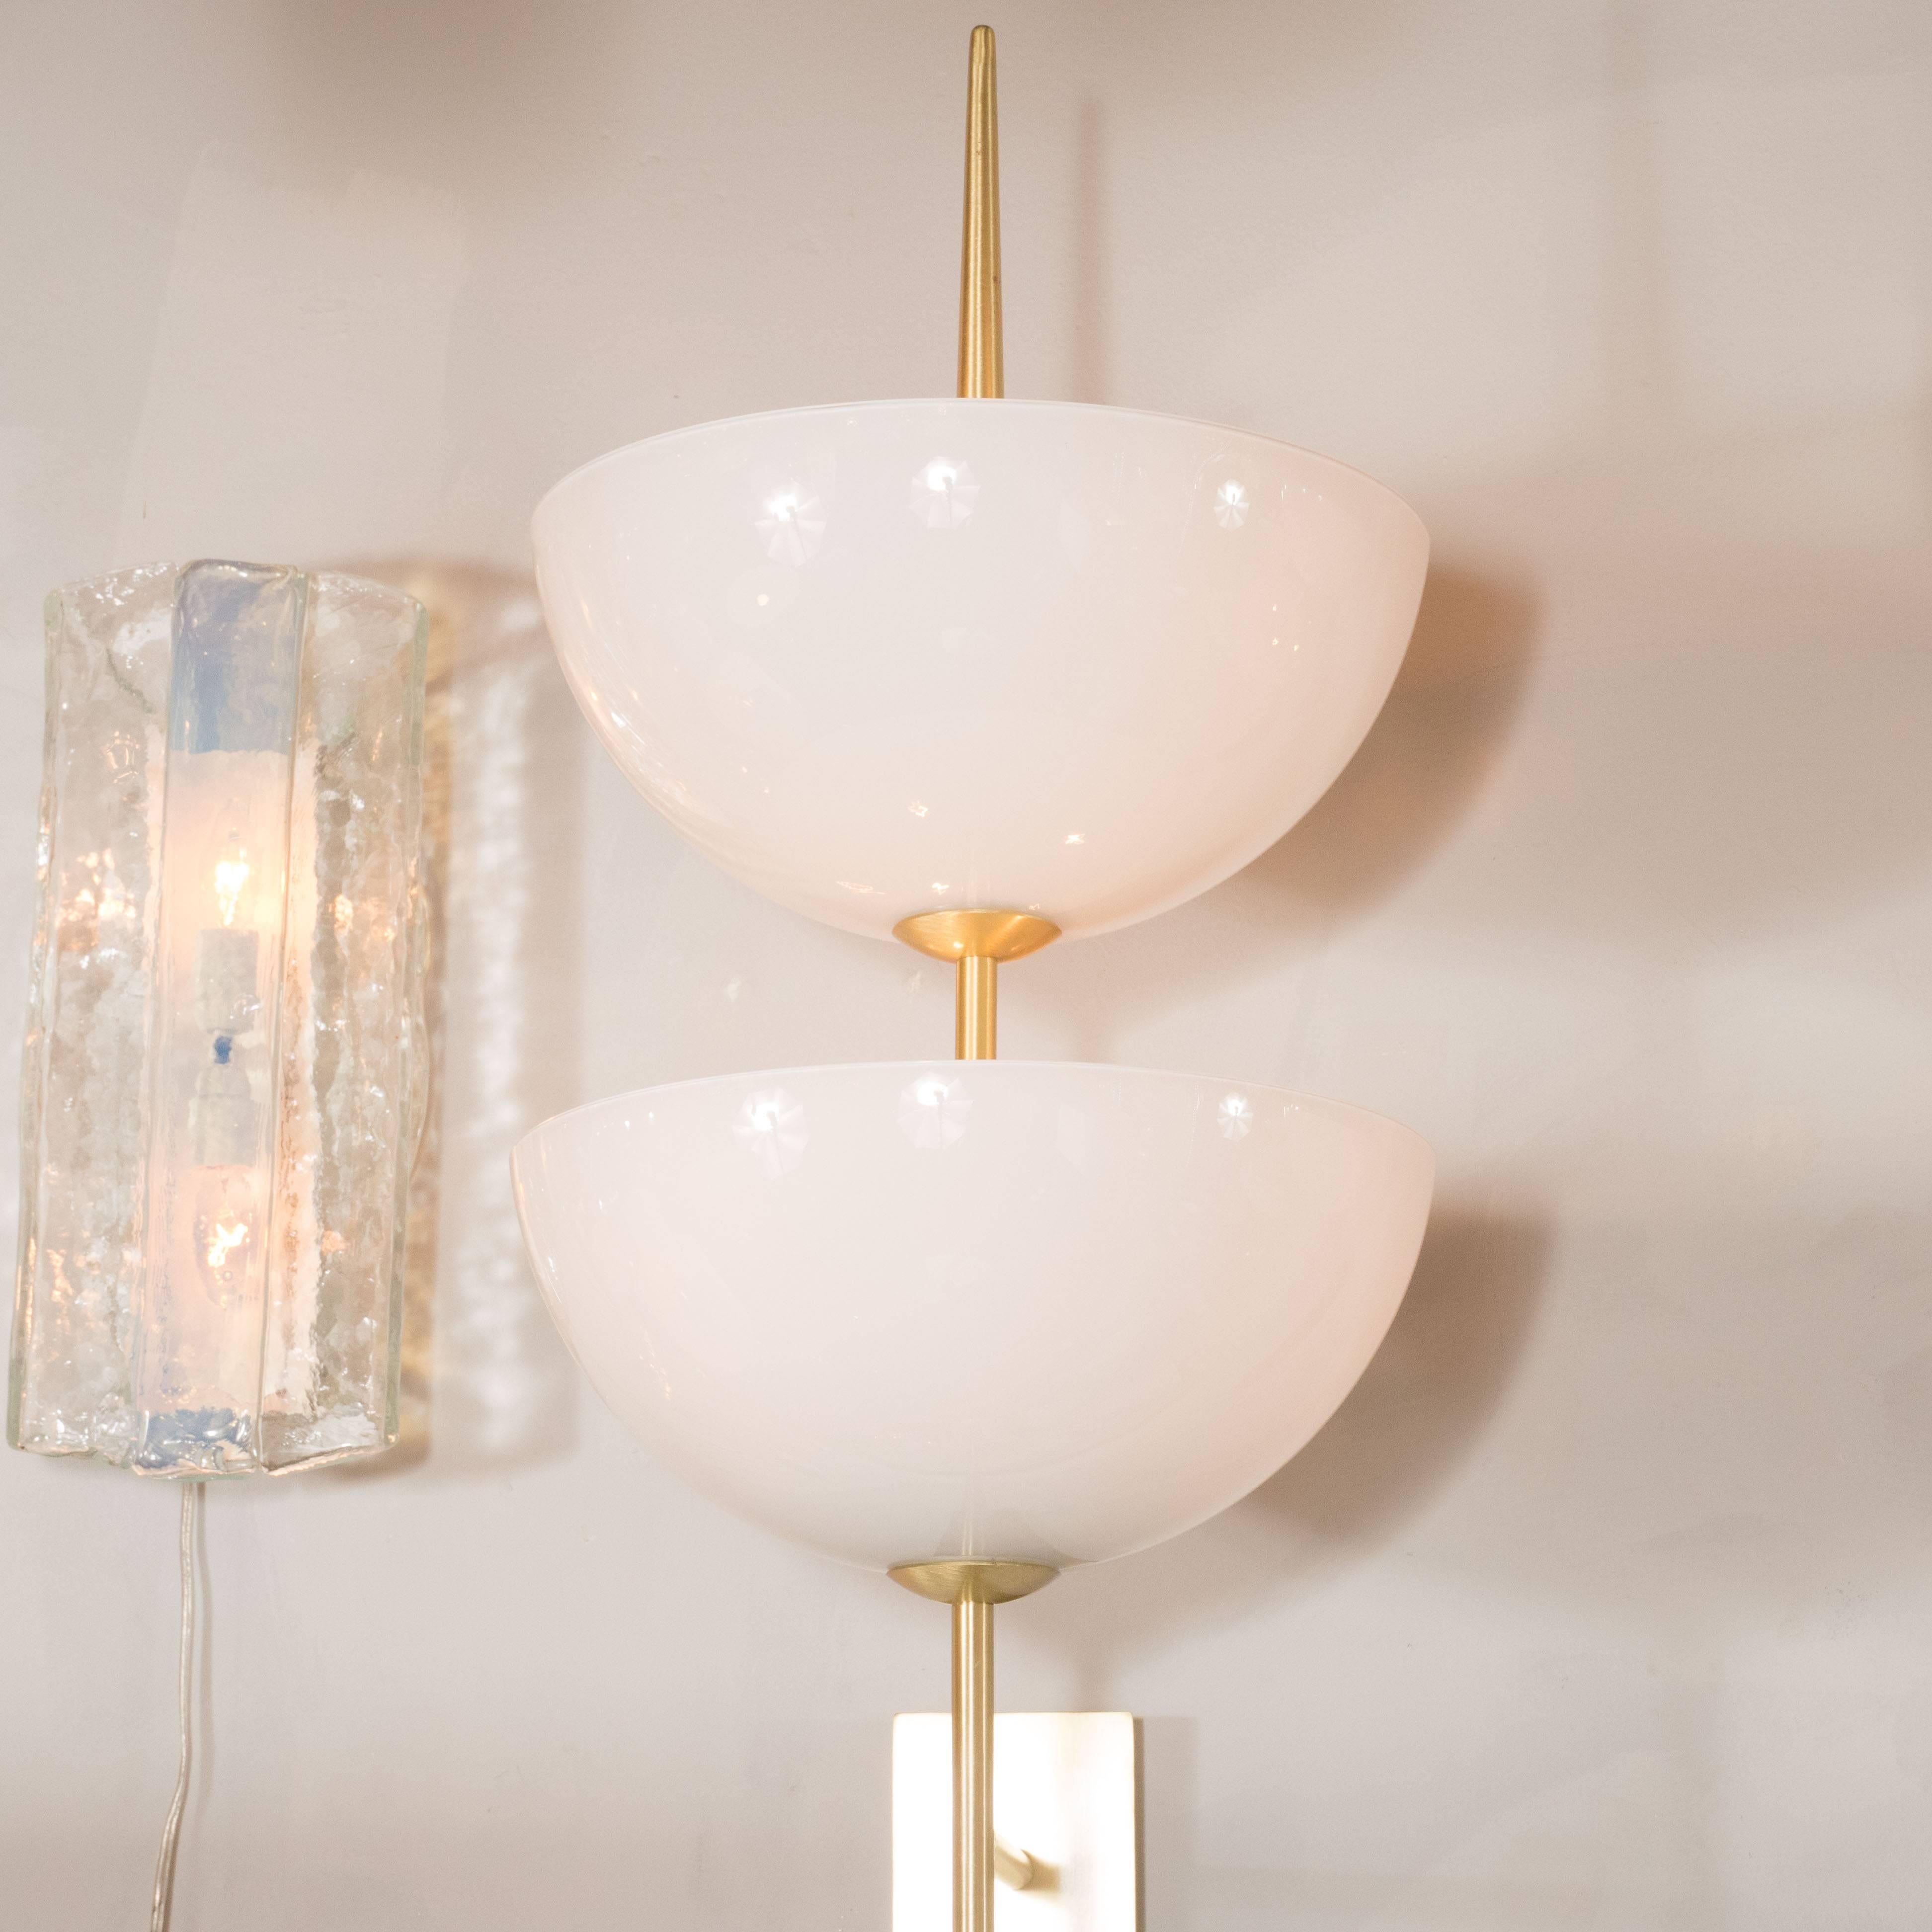 Italian Pair of Reverse-Dome Trophy Sconces in Murano Milk Glass and Brass For Sale